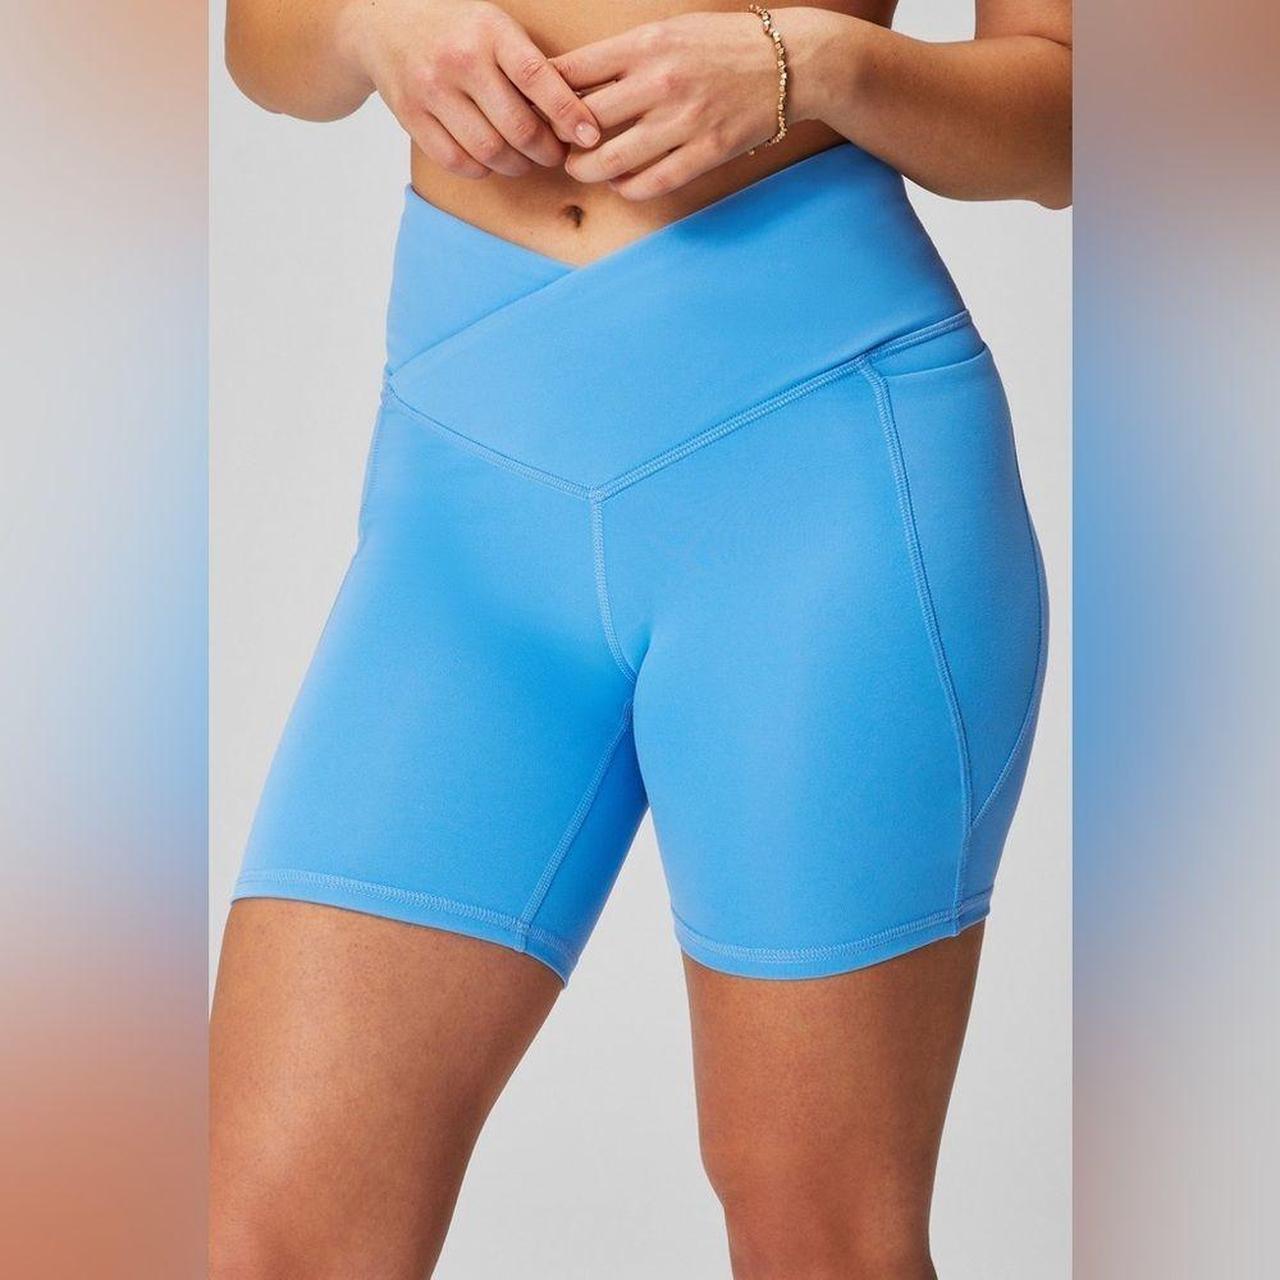 Blue Blossom Fabletics Oasis PureLuxe High Waisted